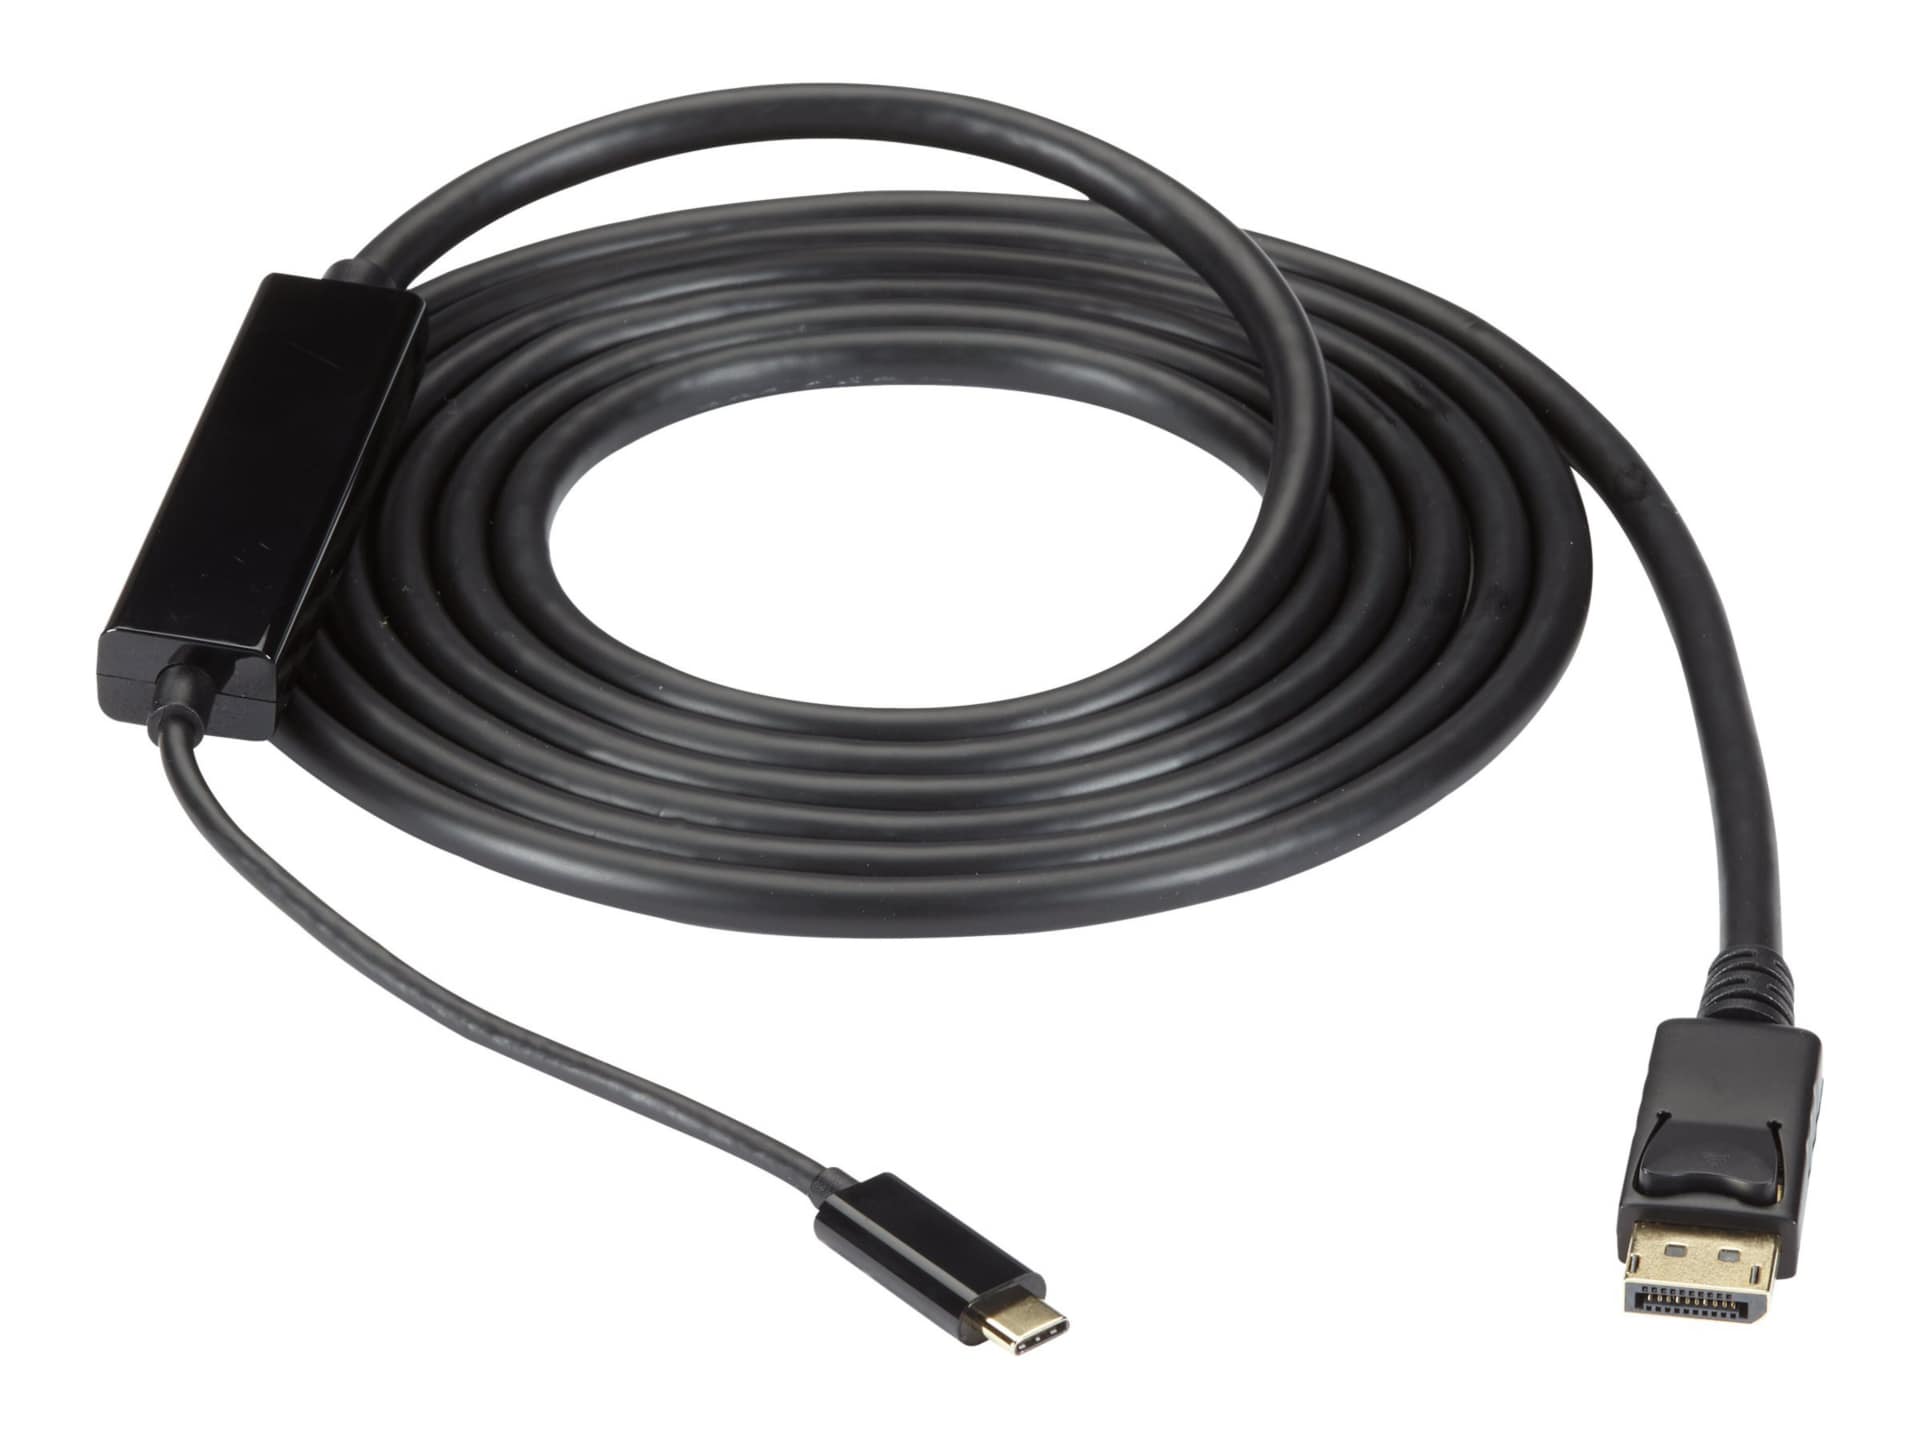 Black Box - video adapter cable - USB-C to DisplayPort - 10 ft